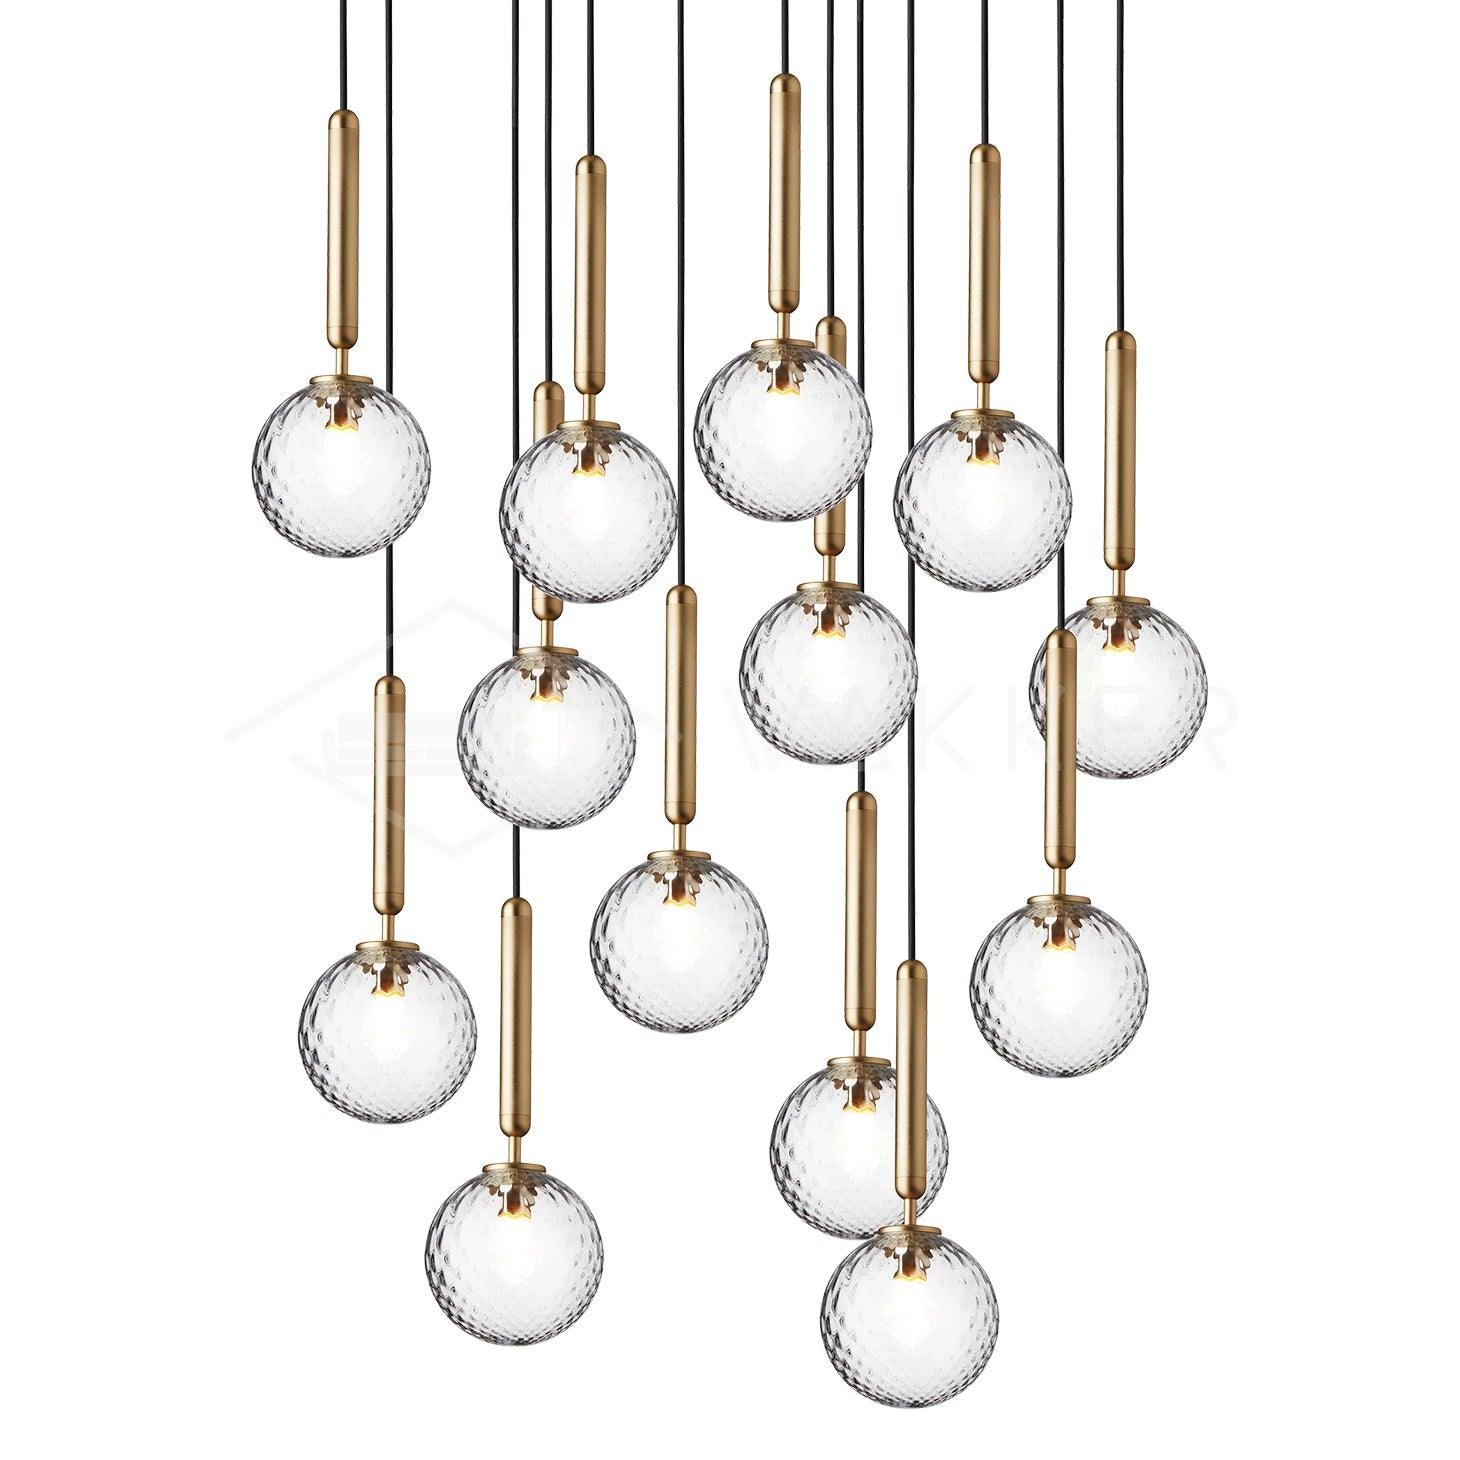 Gold Clear Miira Pendant Light with 13 Heads, measuring 23.6 inches in diameter and 78.7 inches in height (or 60cm x 200cm).